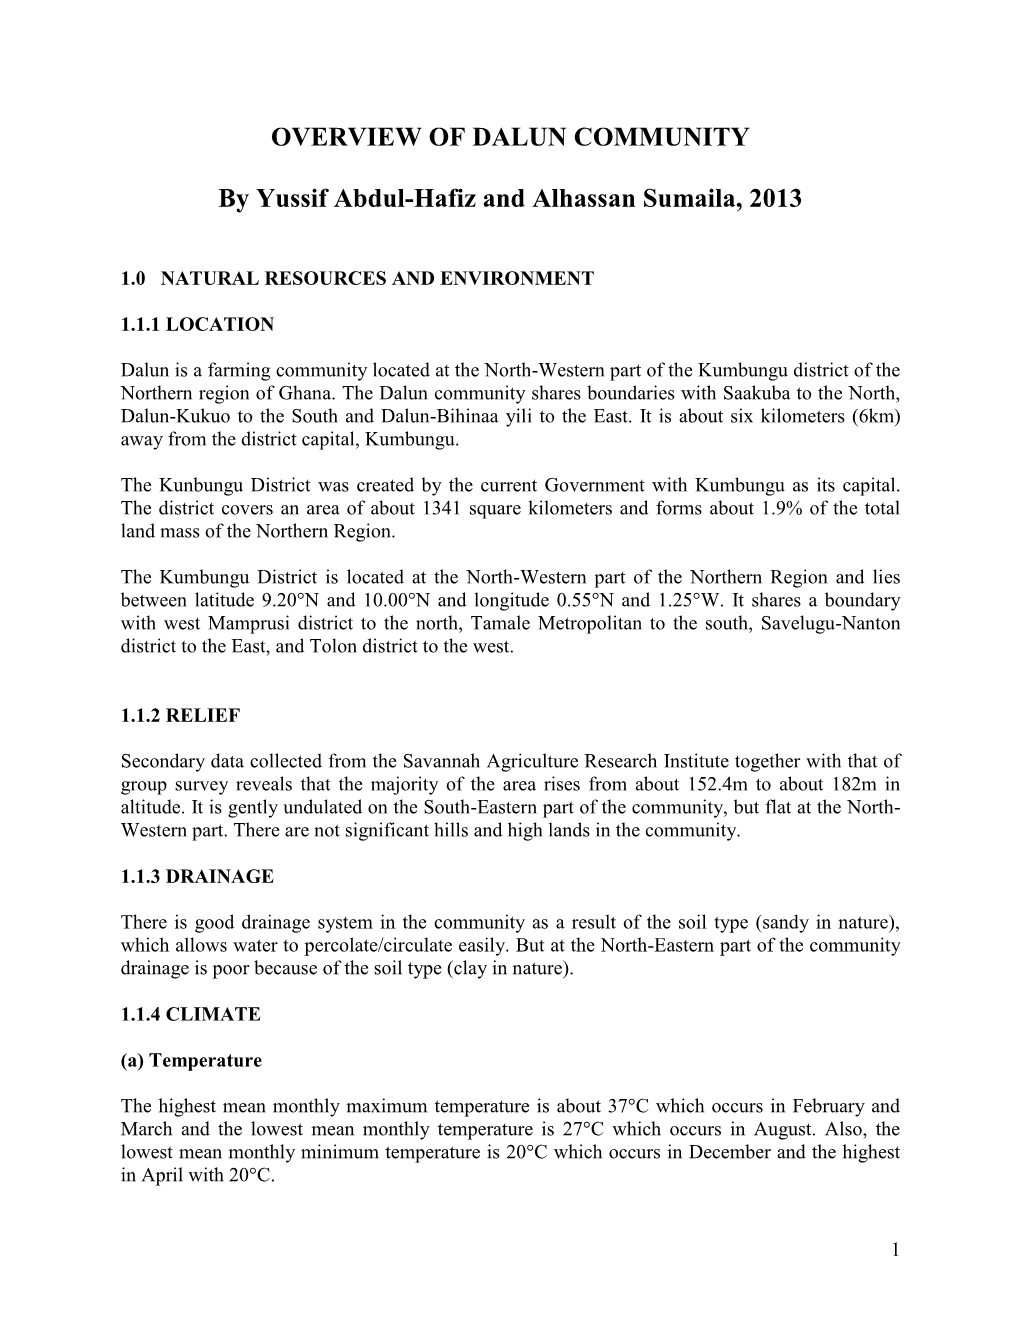 Dalun Overview by Yussif Abdul-Hafiz and Alhassan Sumaila